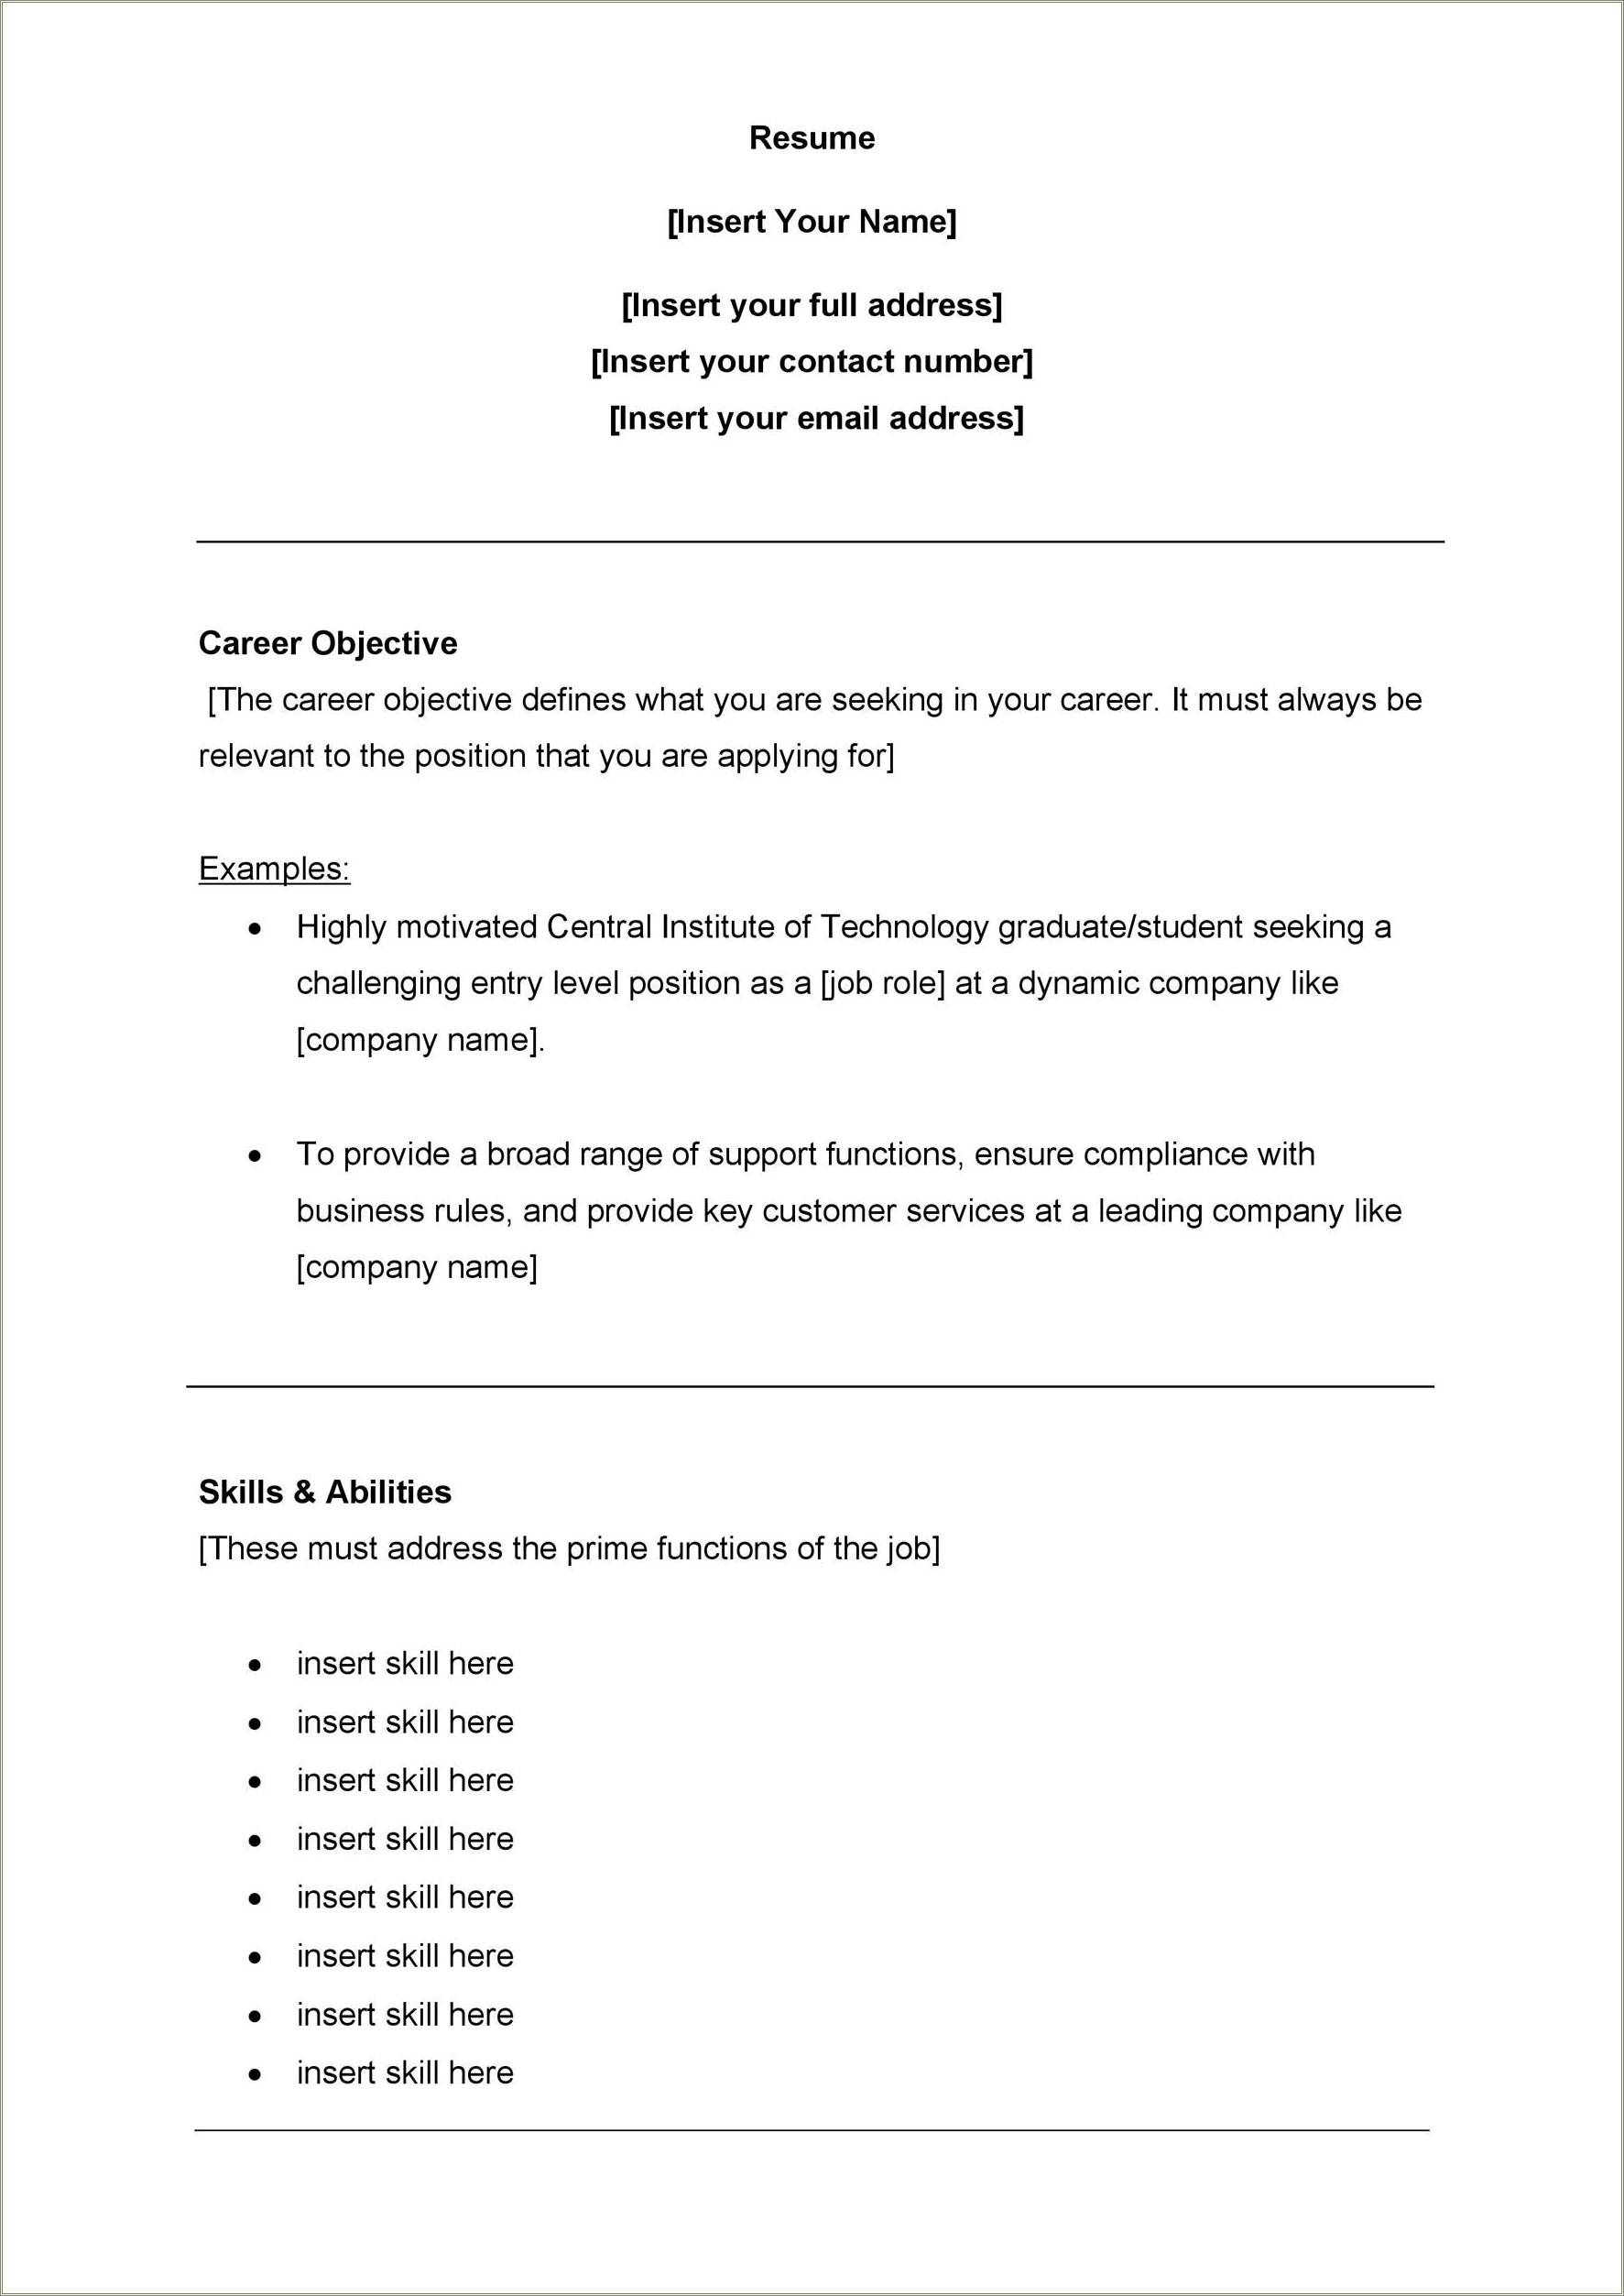 Examples Of Resume Objective For Customer Service